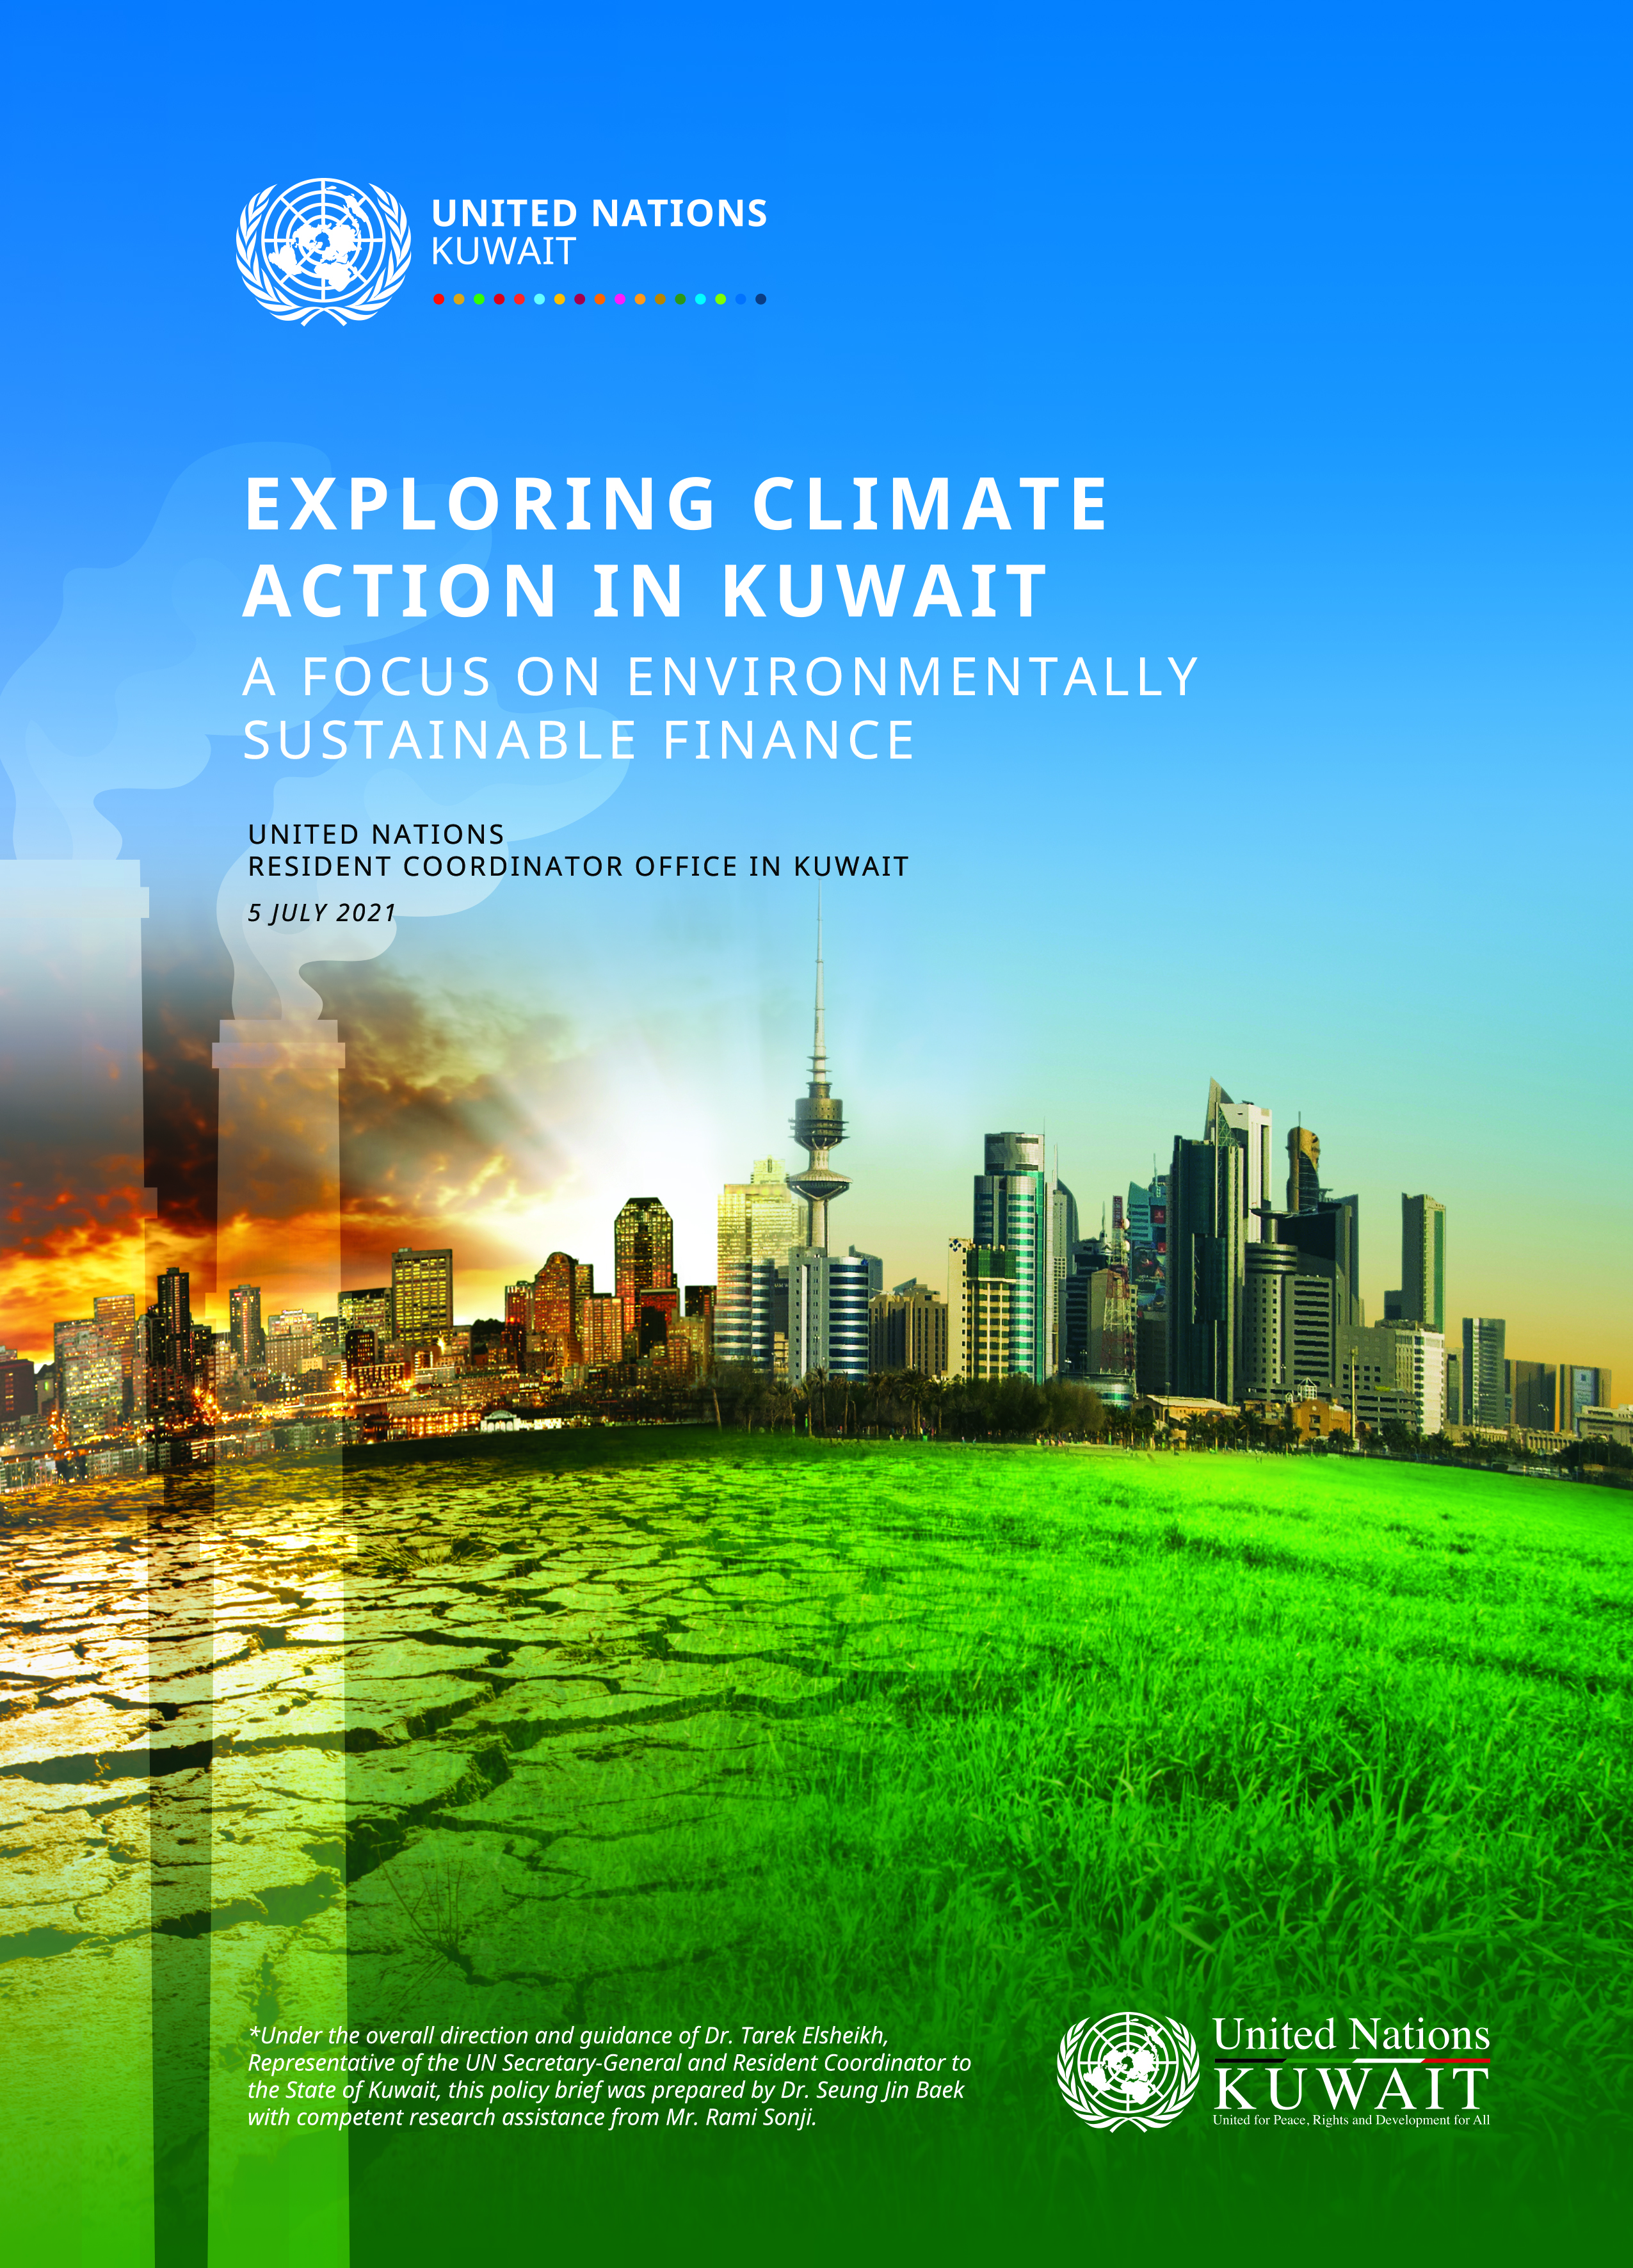 Policy Brief on Climate Action with Focus on Environmentally Sustainable Finance